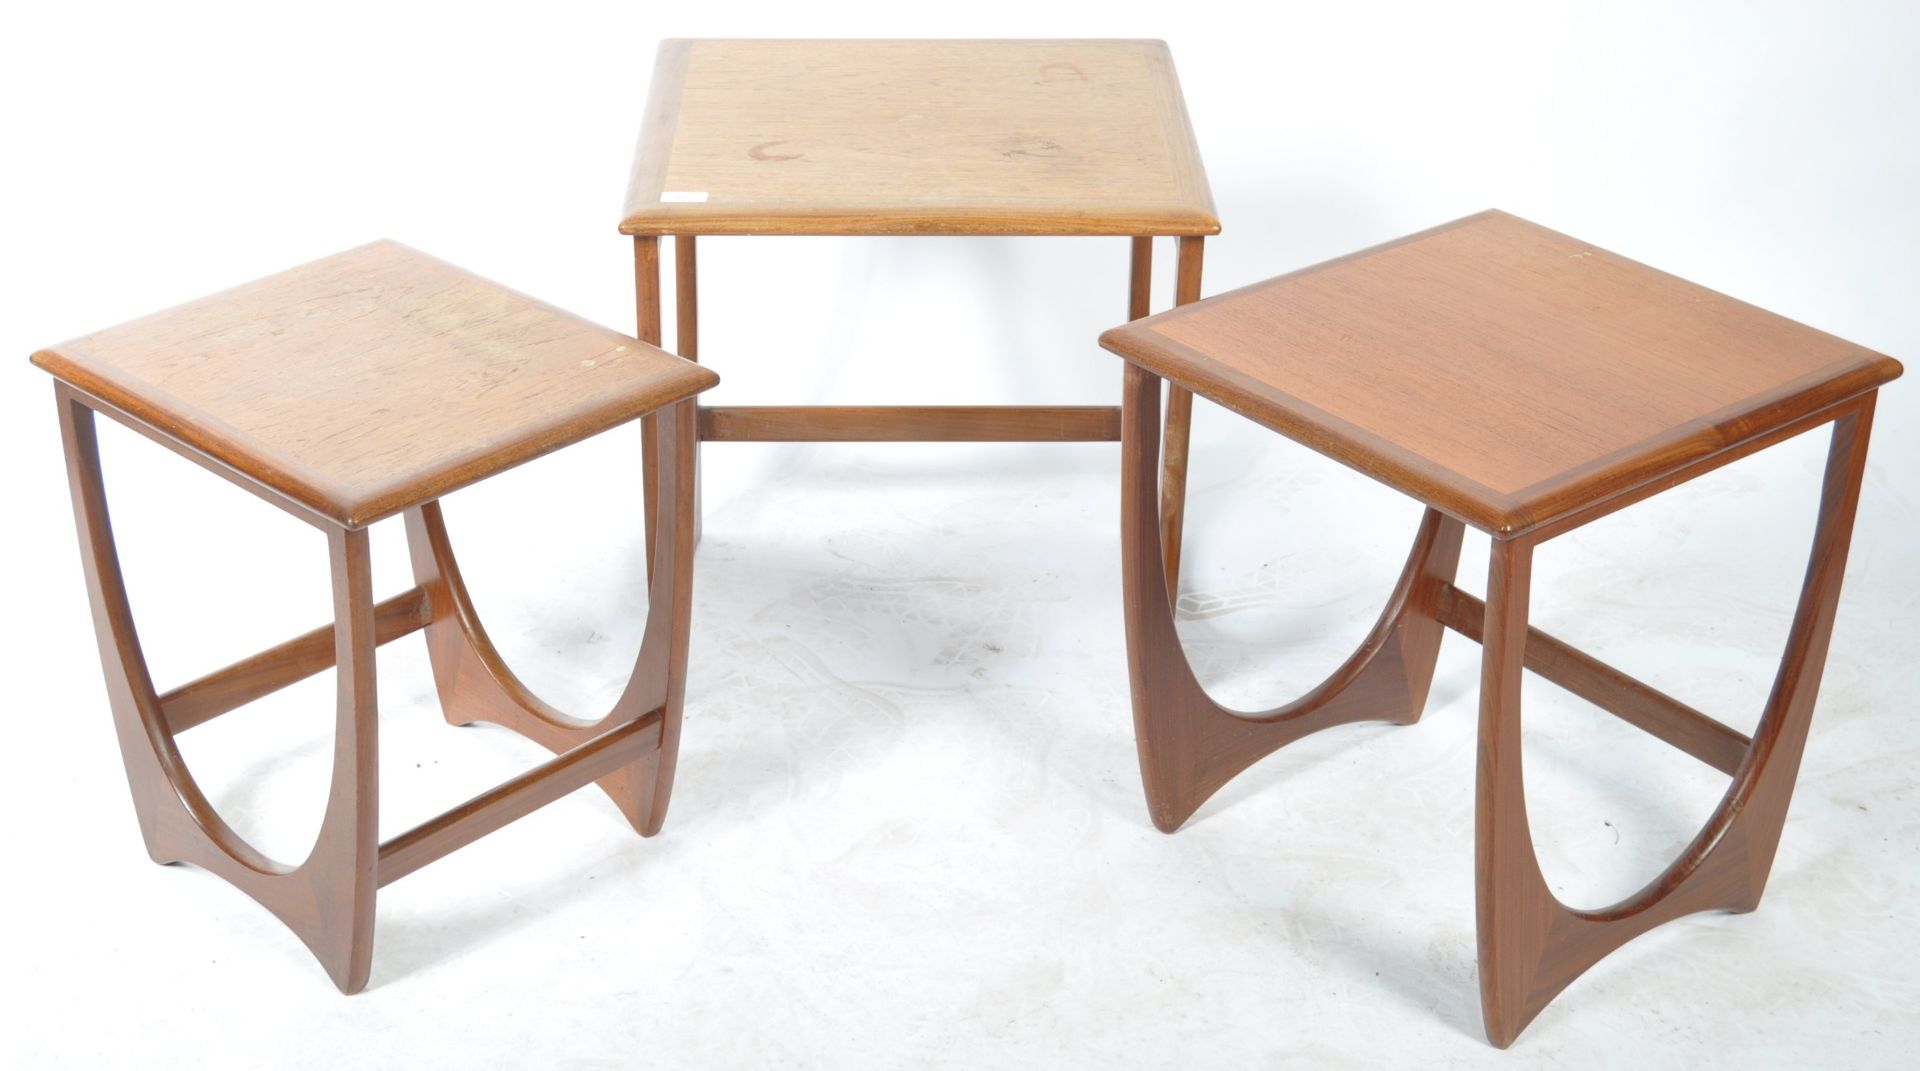 G PLAN ASTRO NEST OF TEAK TABLES IN THE ASTRO PATTERN - Image 3 of 4